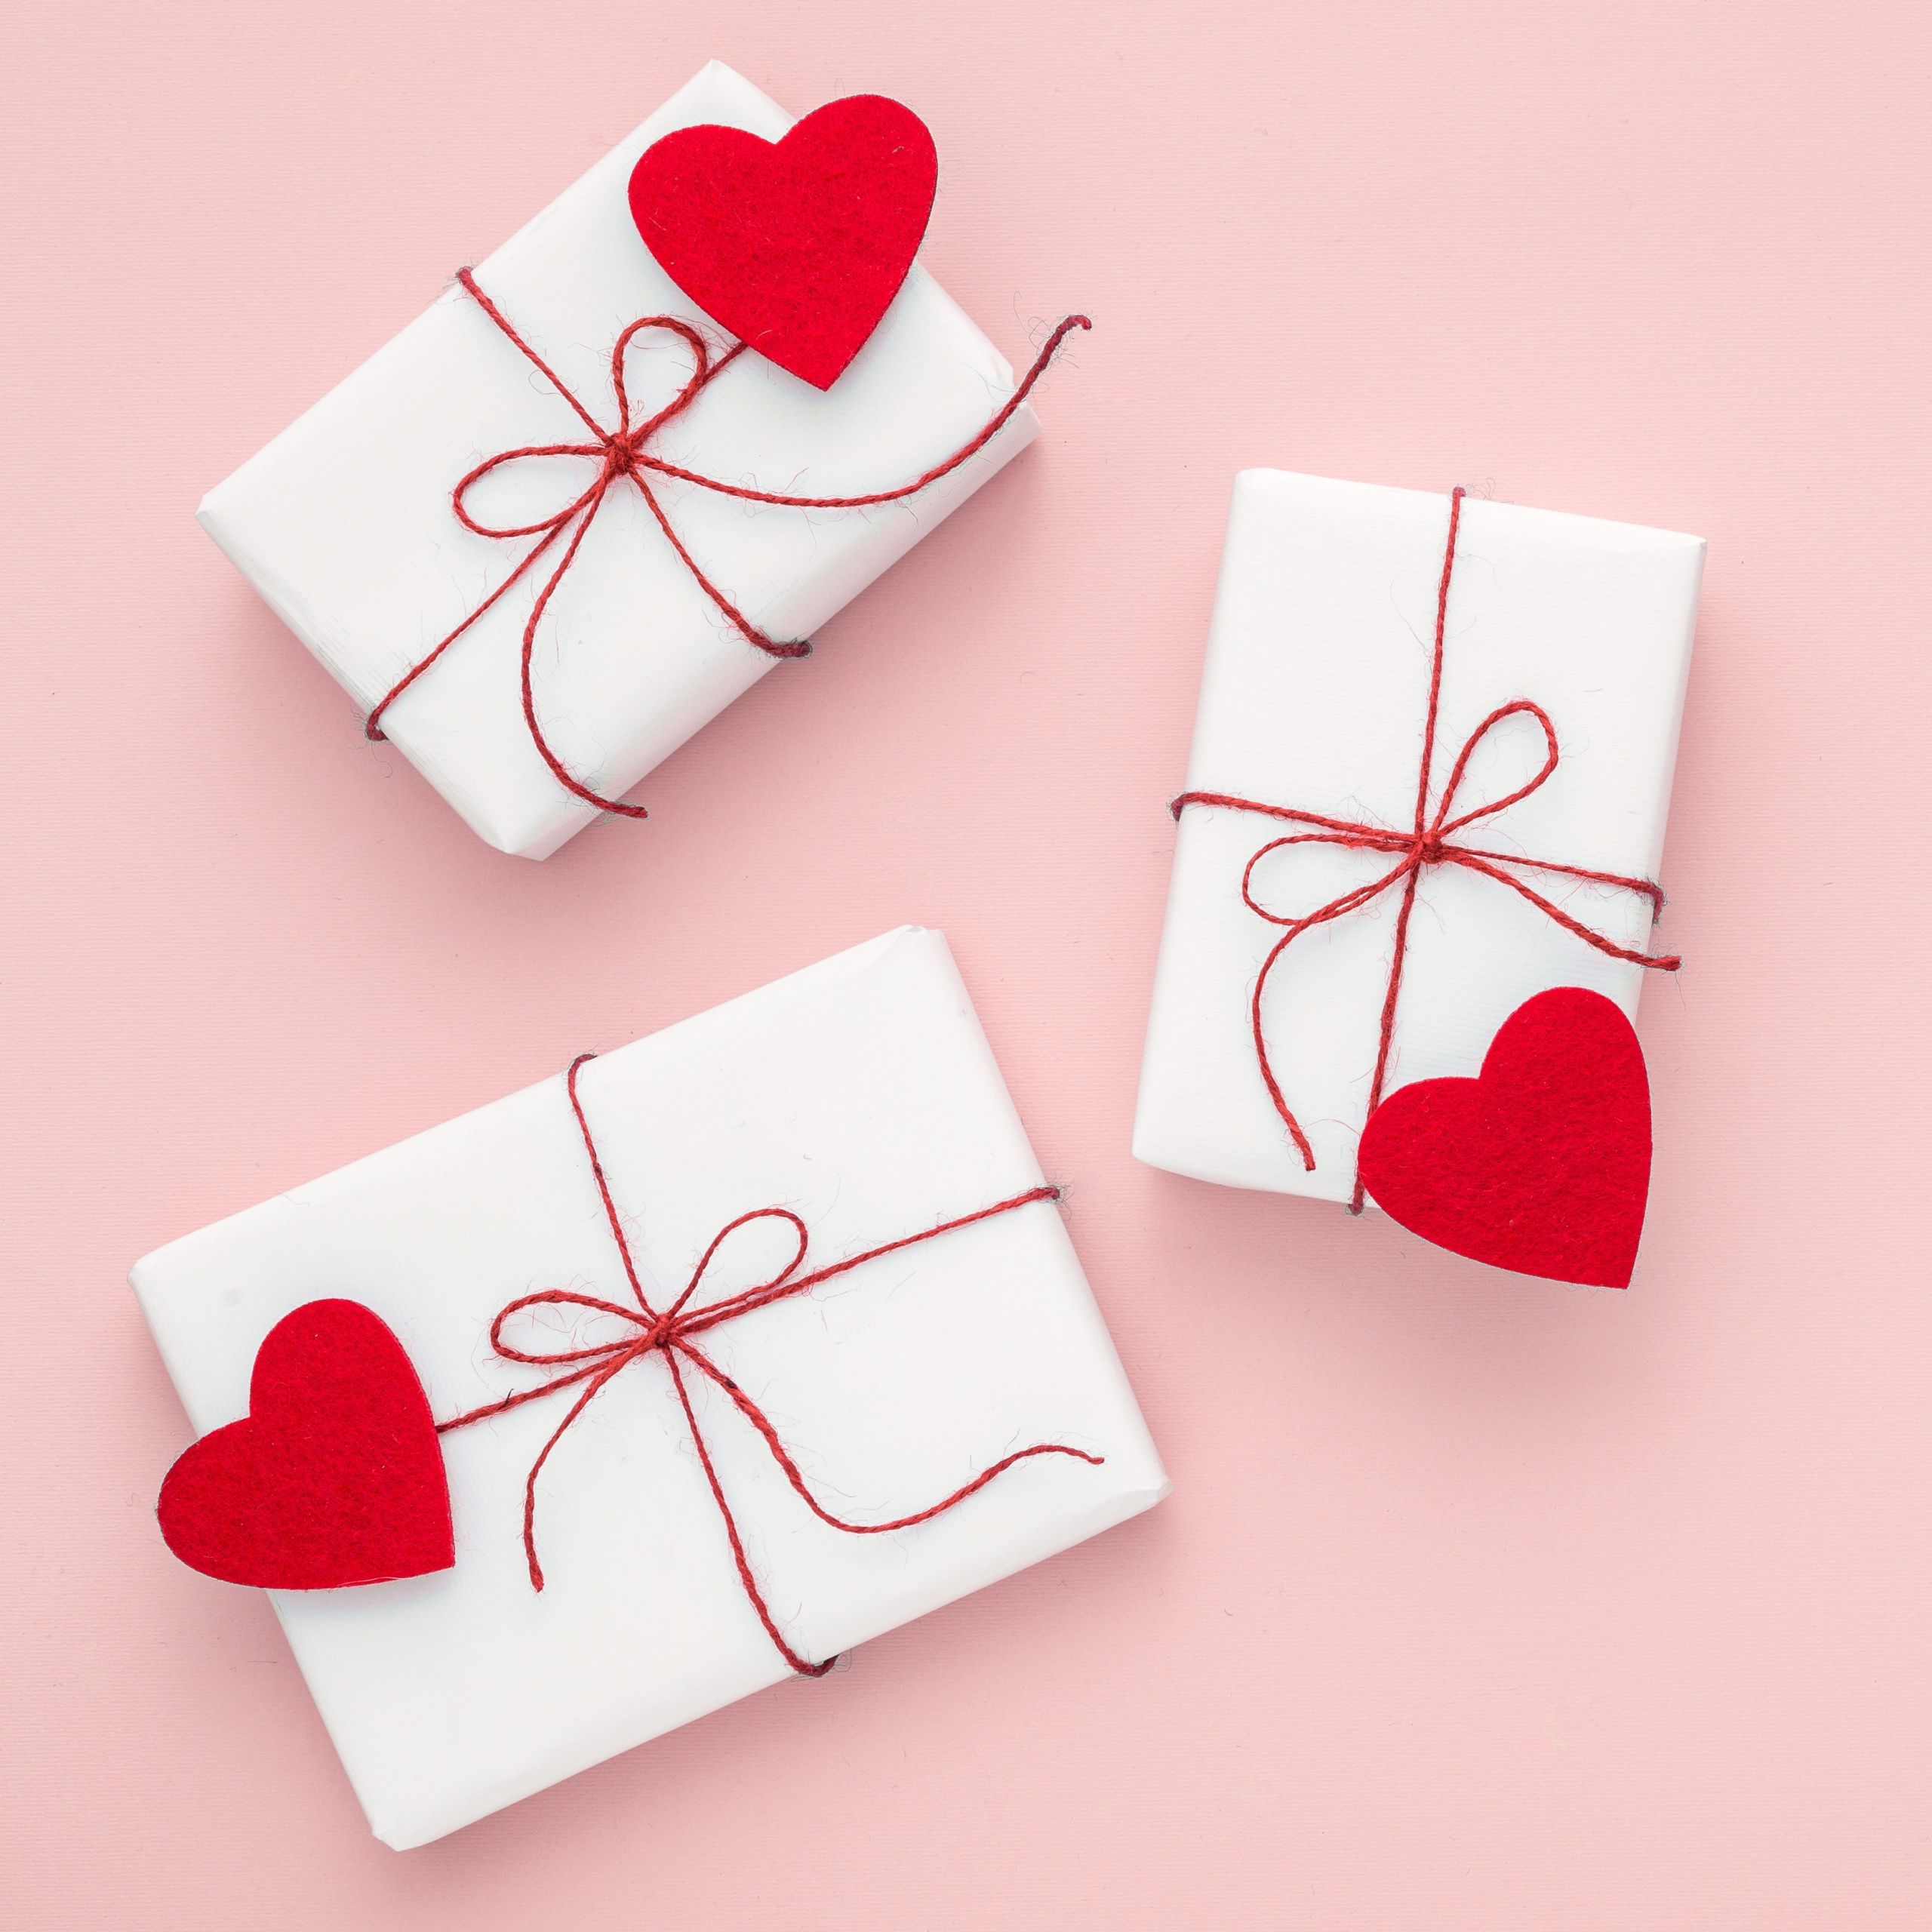 Valentines Day Gifts Amazon
 Most Popular Valentine s Day Gifts on Amazon